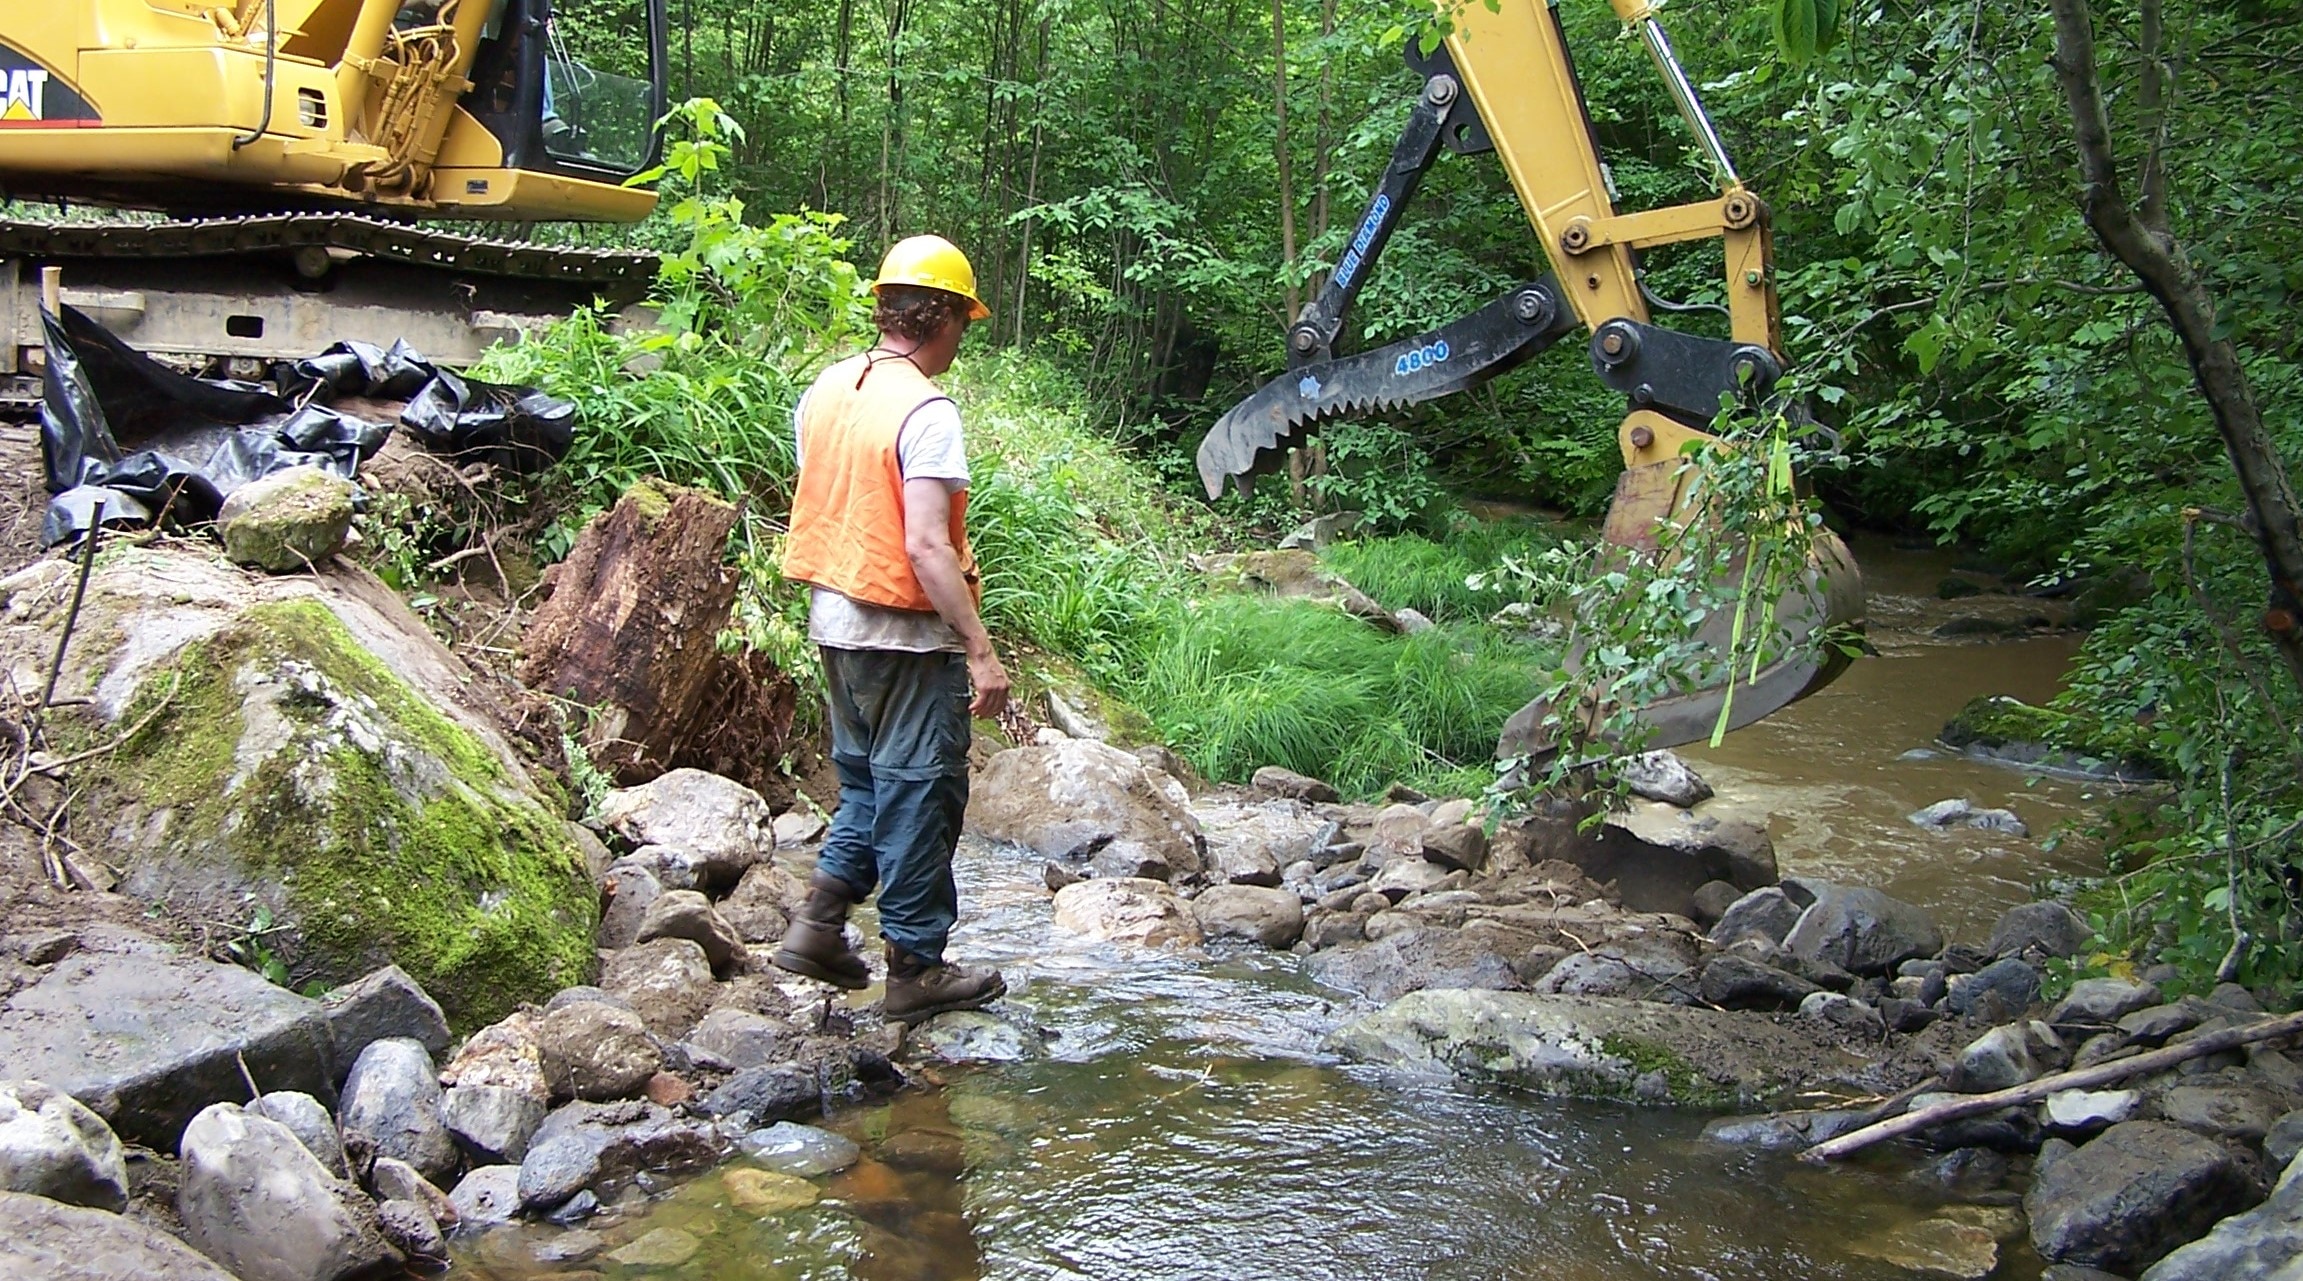 A person in a hard hat and high visibility vest walking in a stream next to construction equipment.